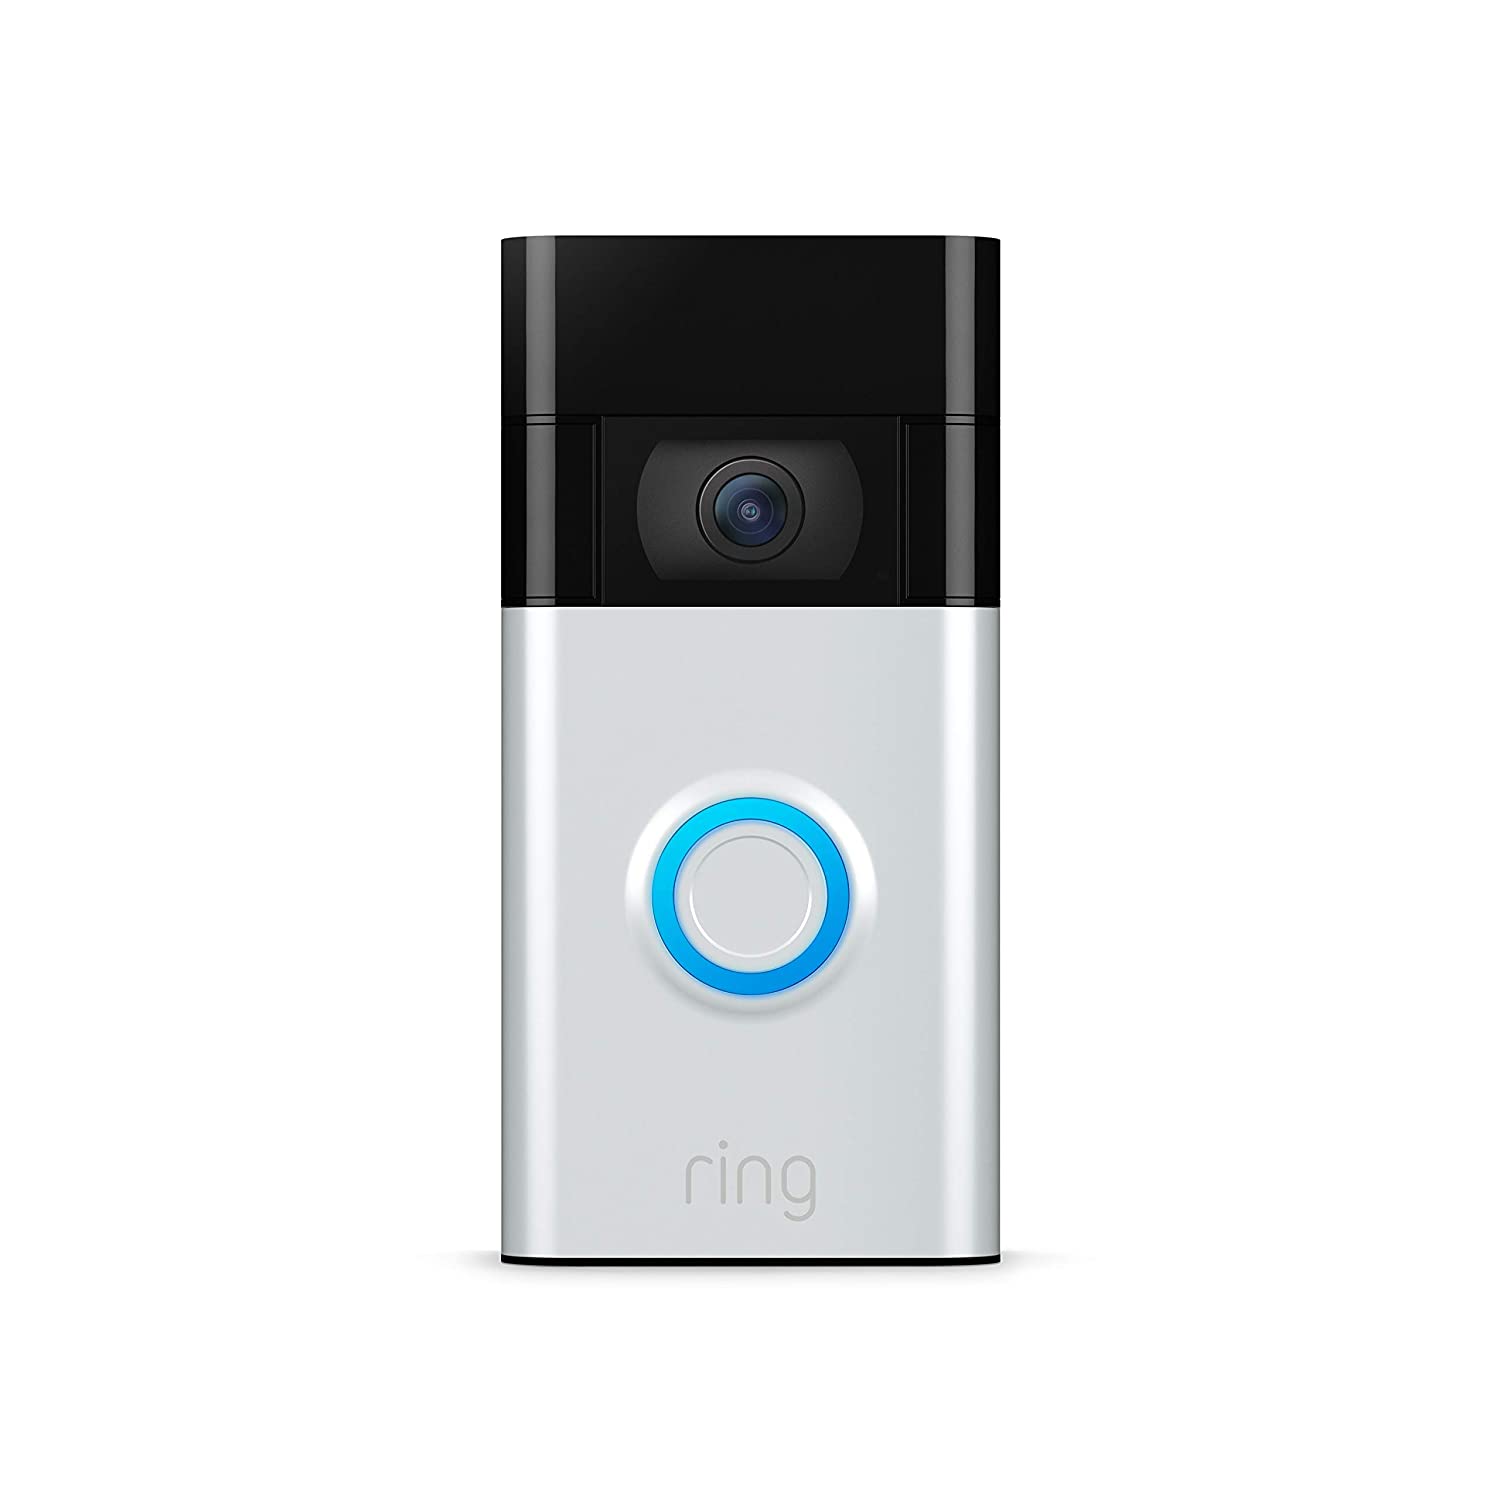 16 Perfect Mother's Day Gift Ideas ring doorbell